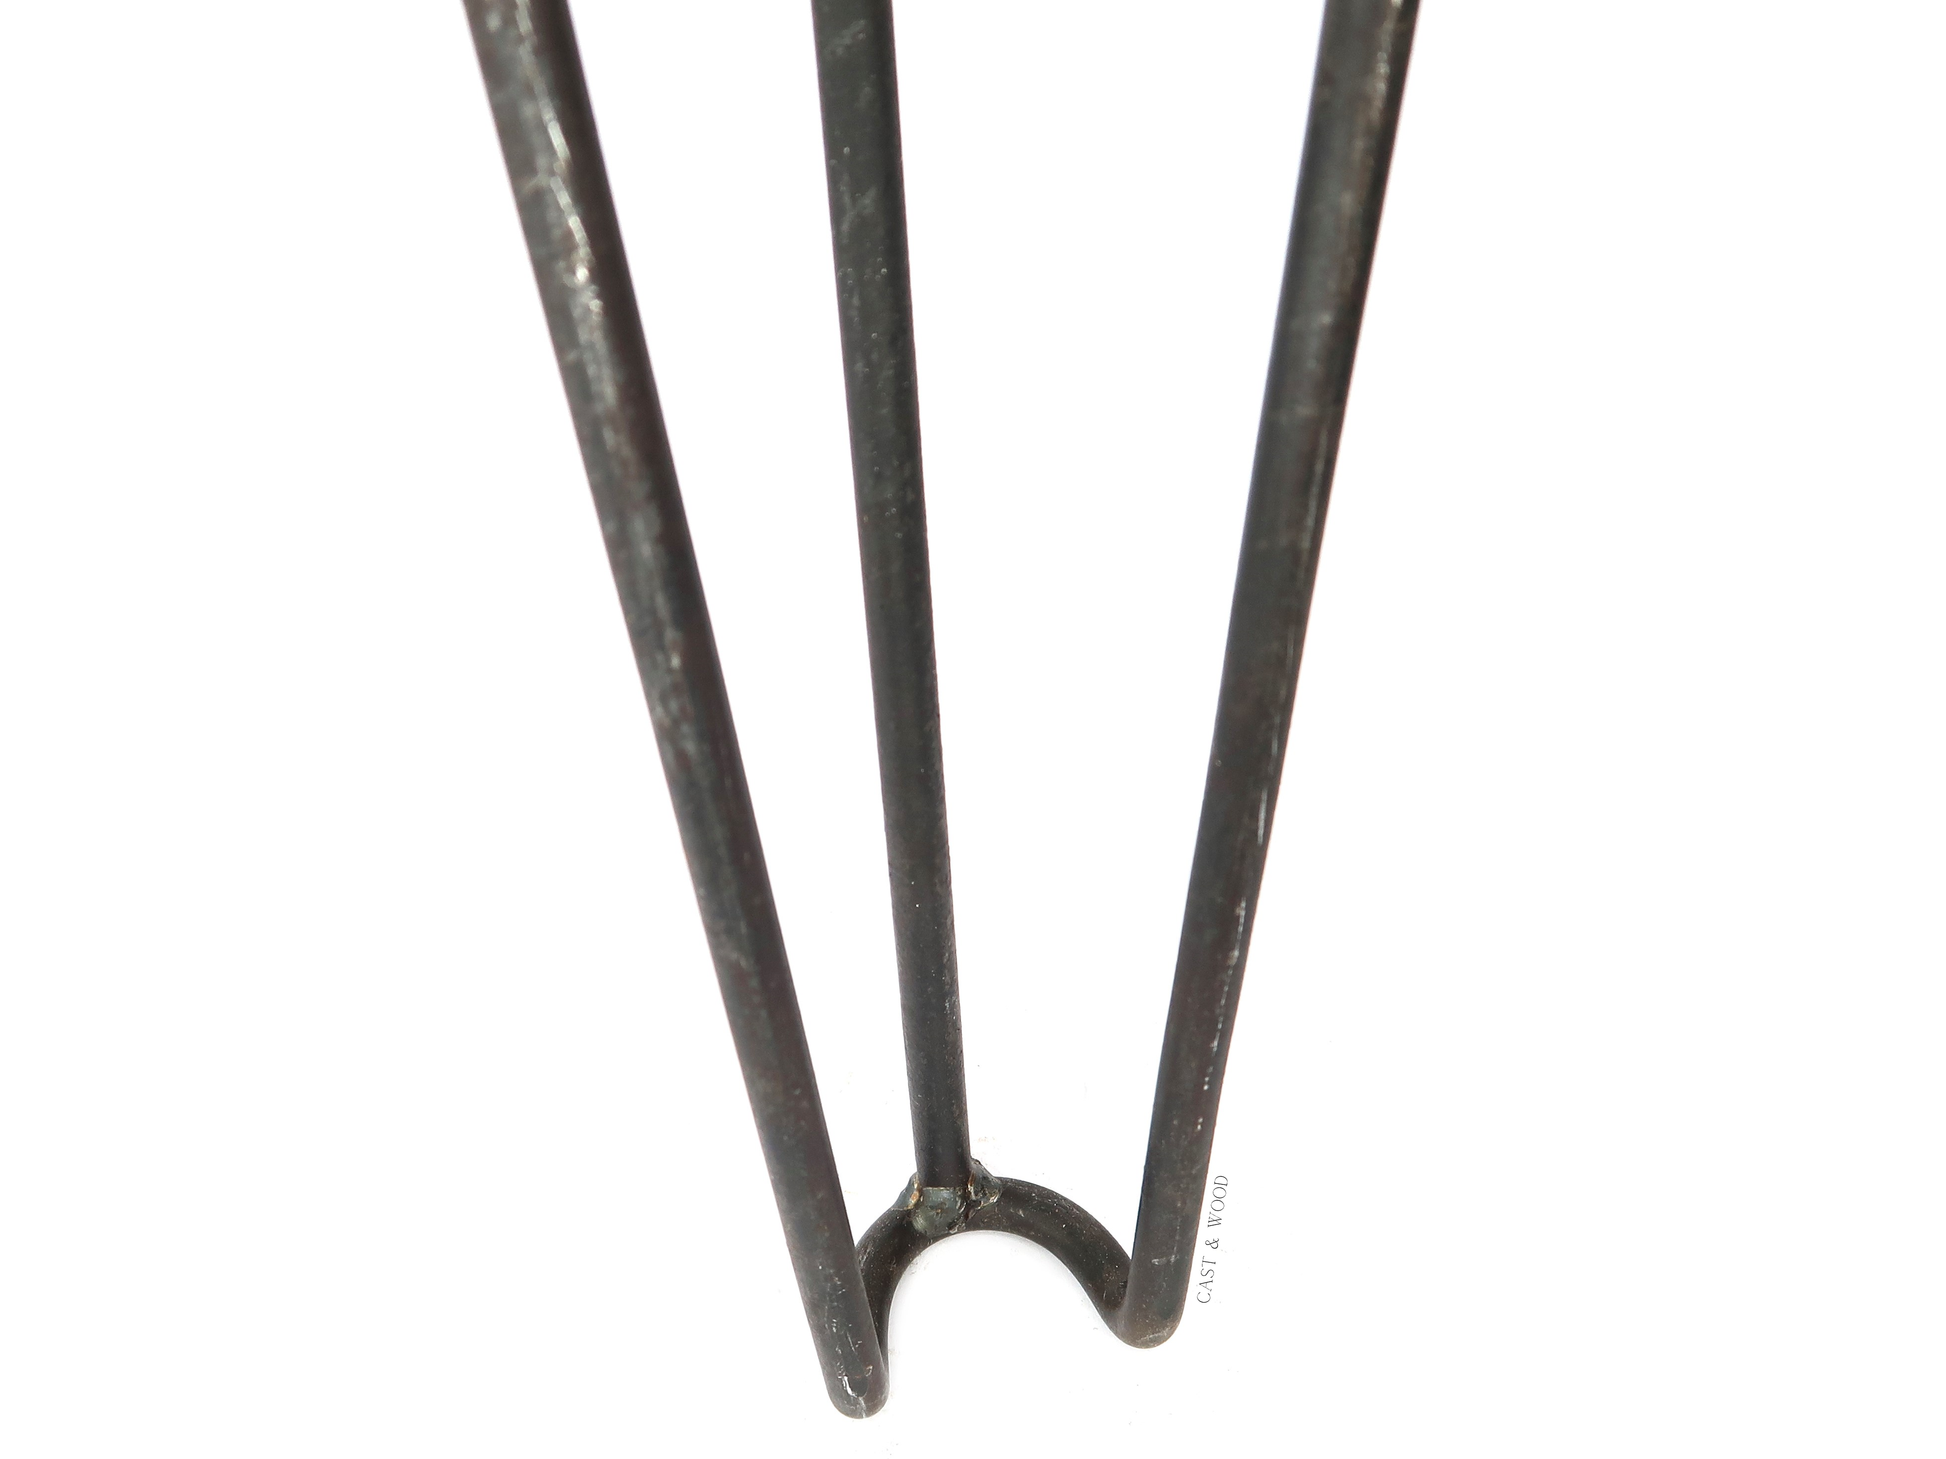 Footed Detail Hairpin Legs - Set of 4no - Bench 400mm Cast & Wood